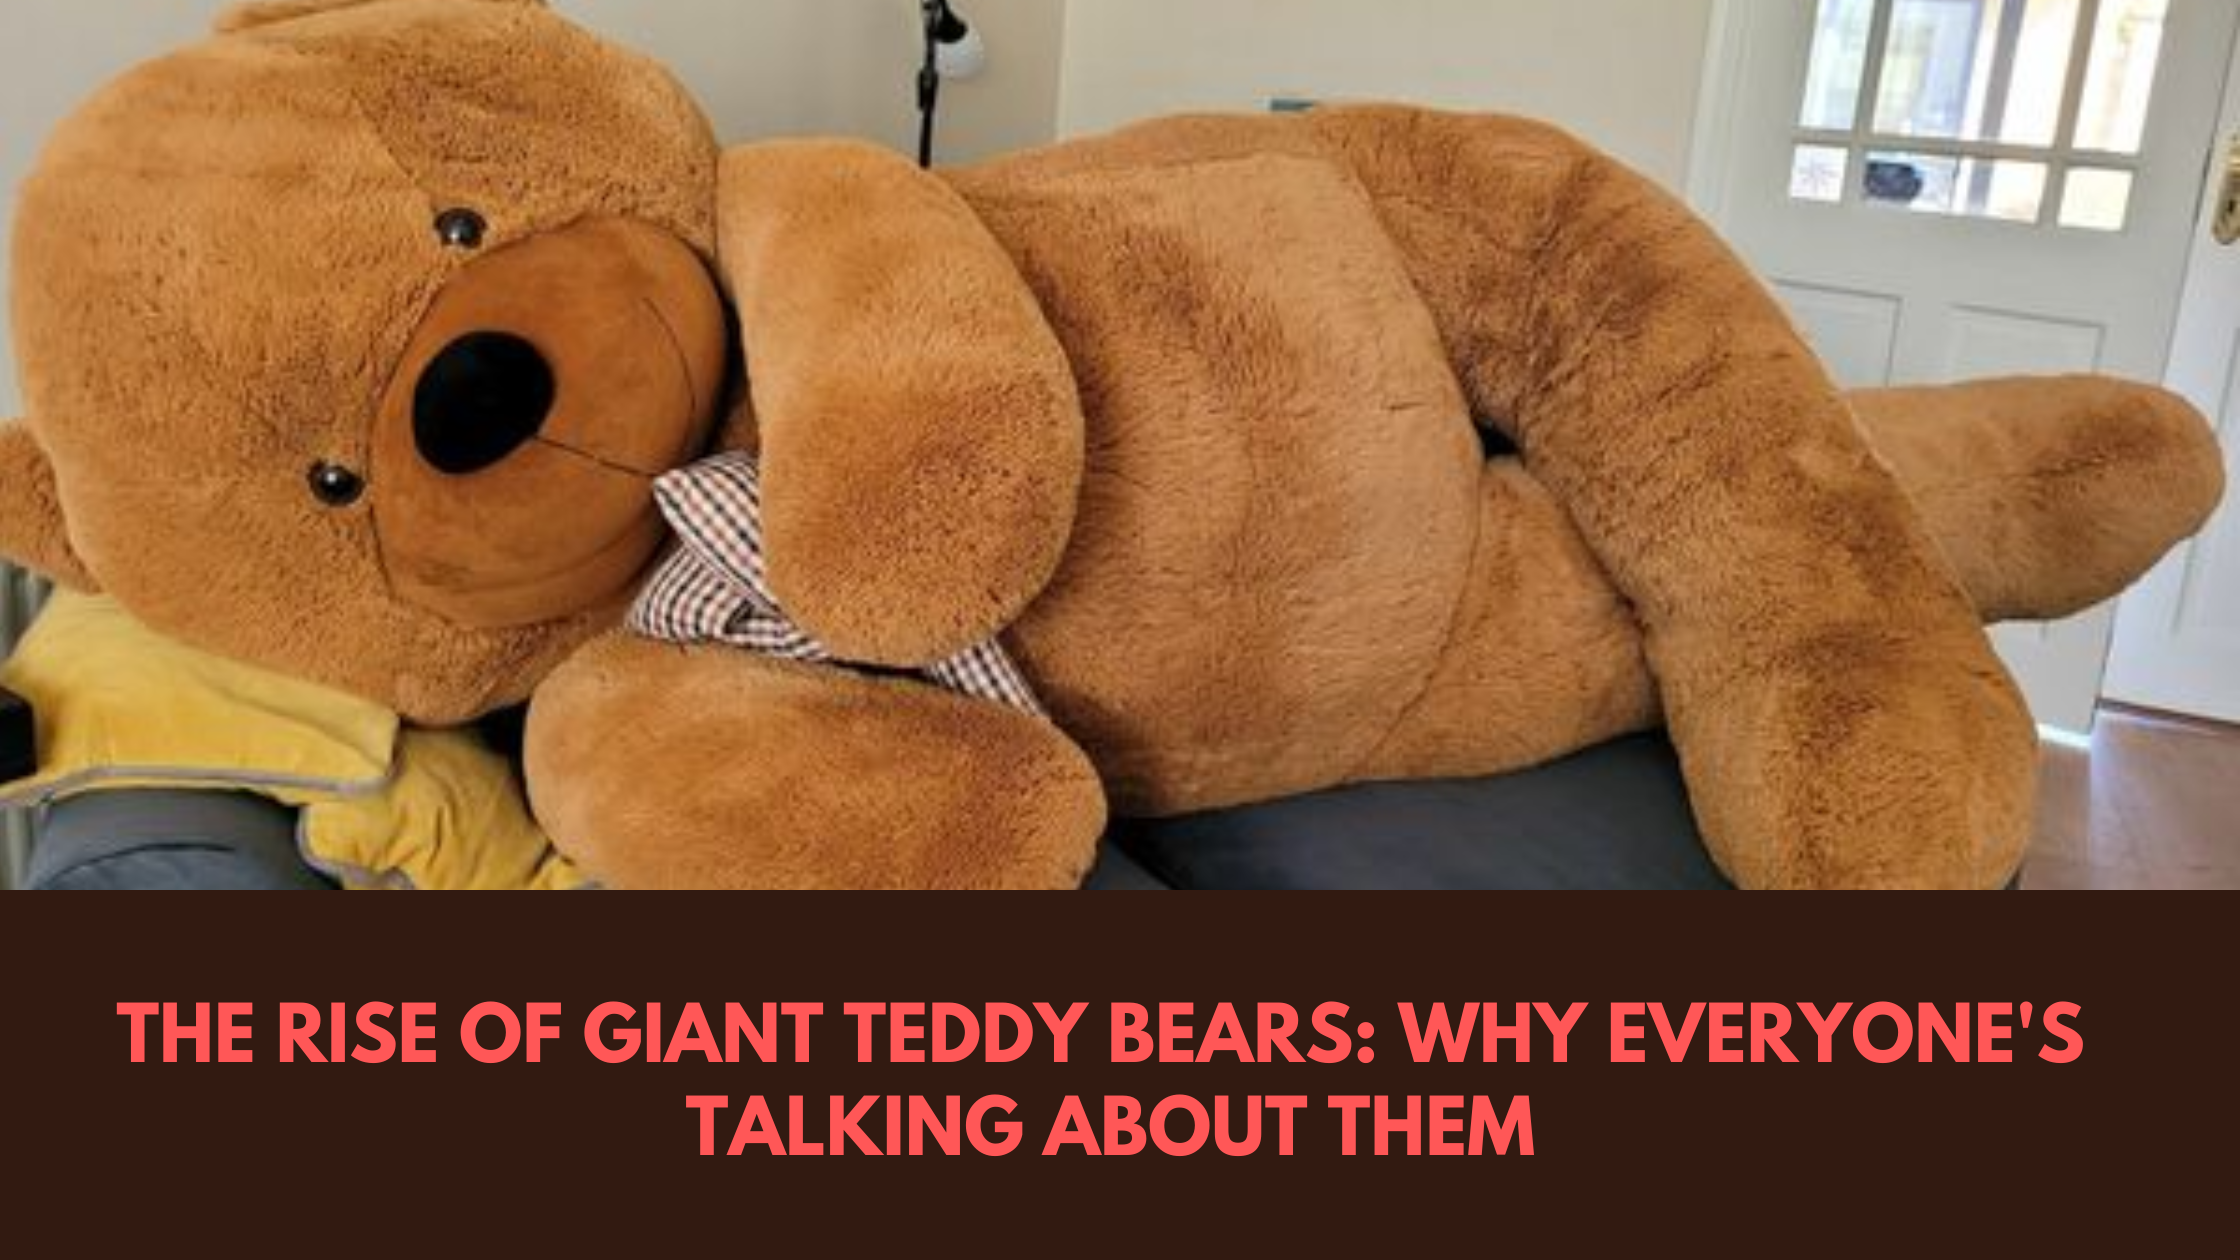 The Rise of Giant Teddy Bears: Why Everyone's Talking About Them